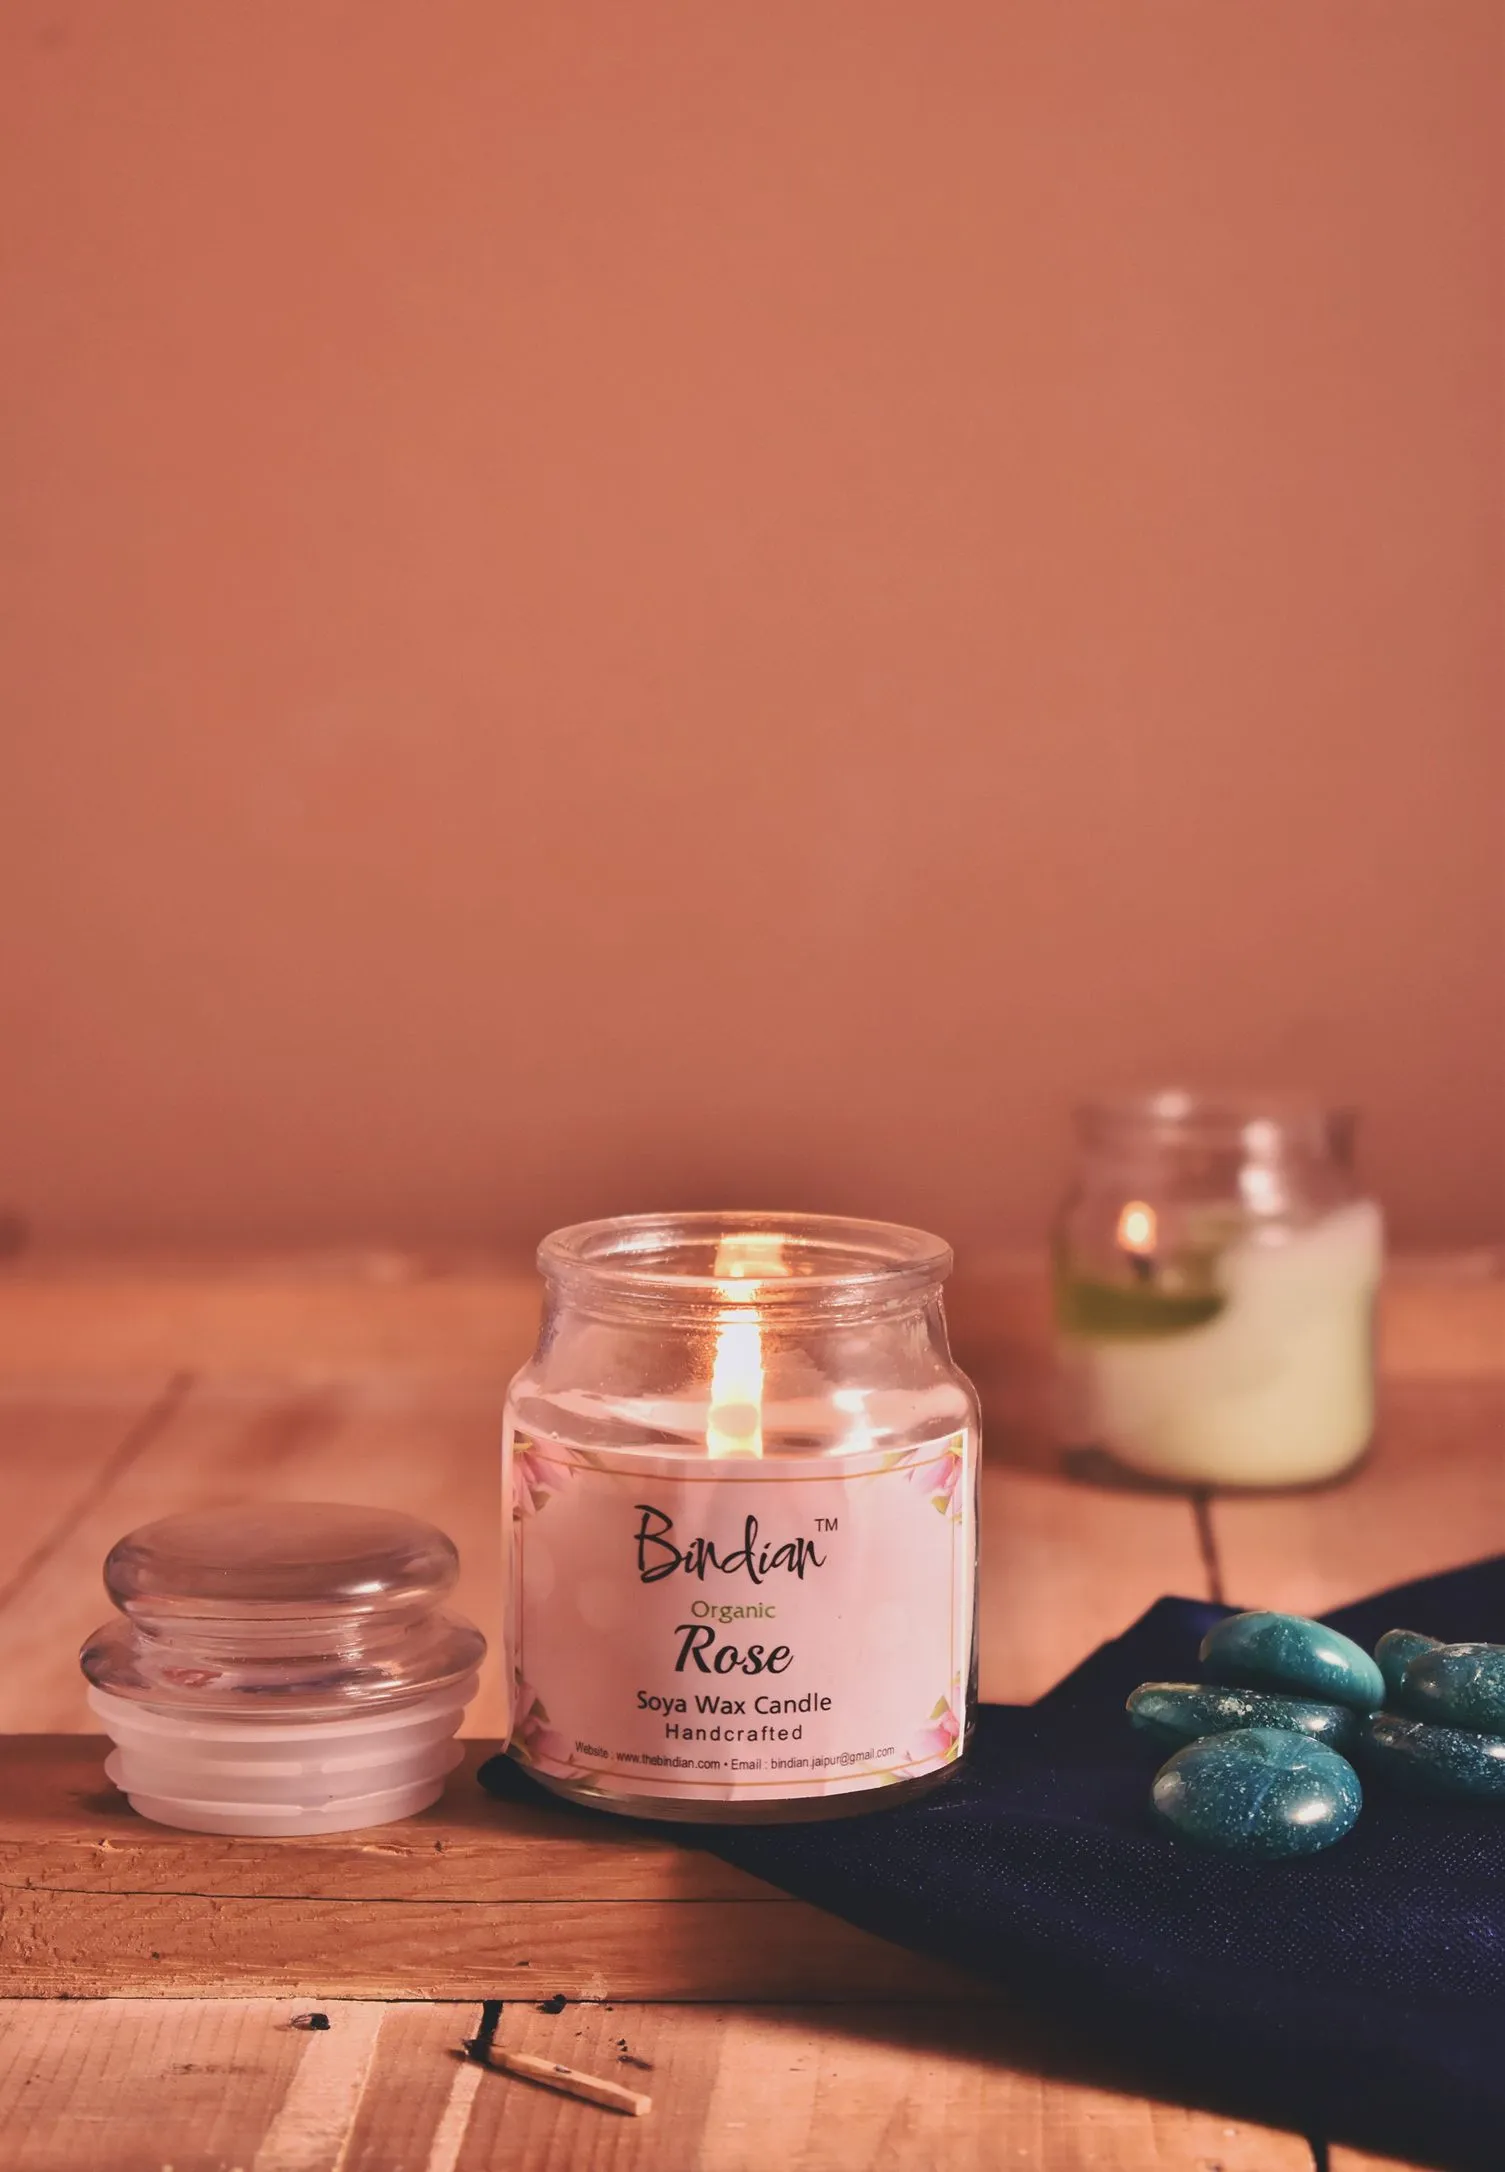 Rose Flavour Scented Candle, 14-18 Hours Long Burning Time